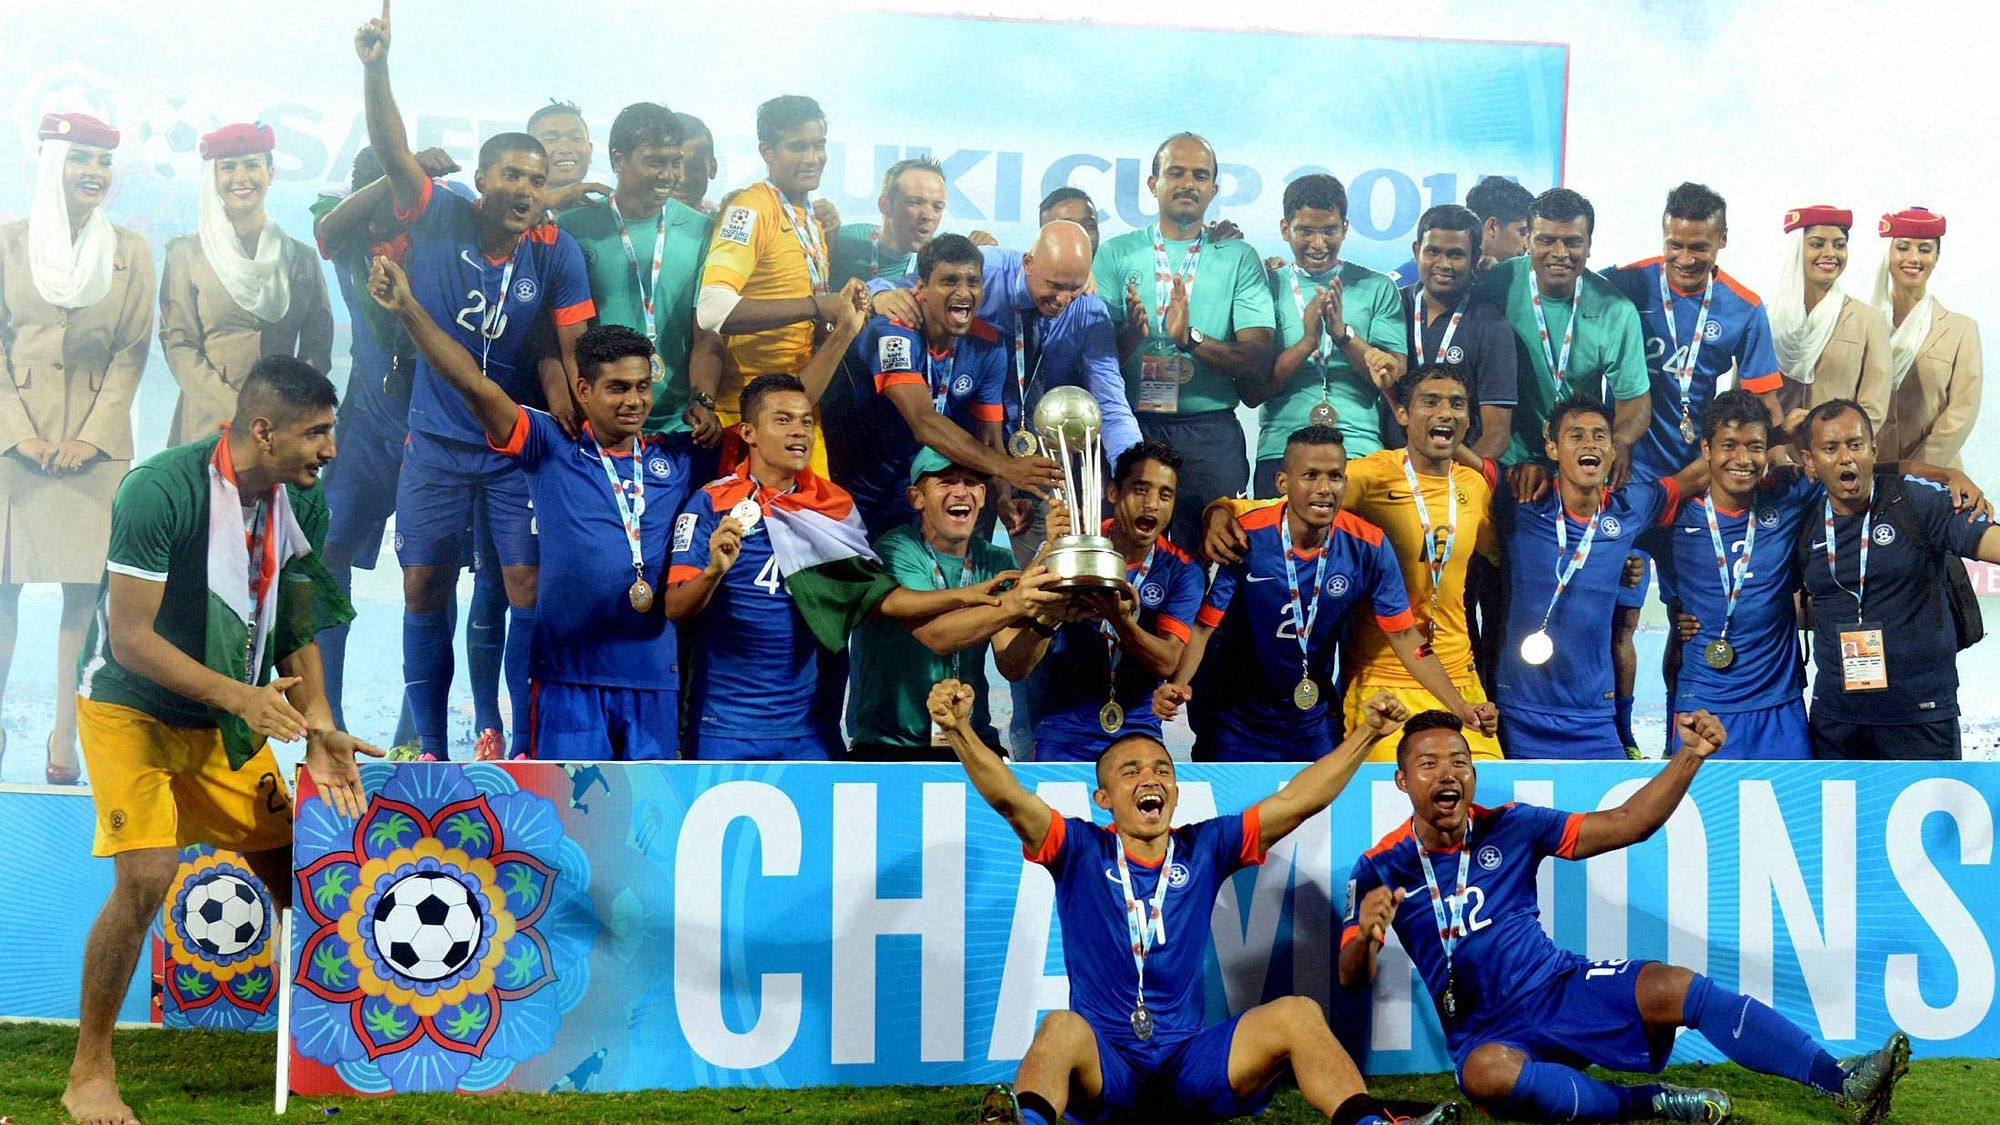 Chettri Jeje And More Top 5 Performers From India S Saff Cup Win